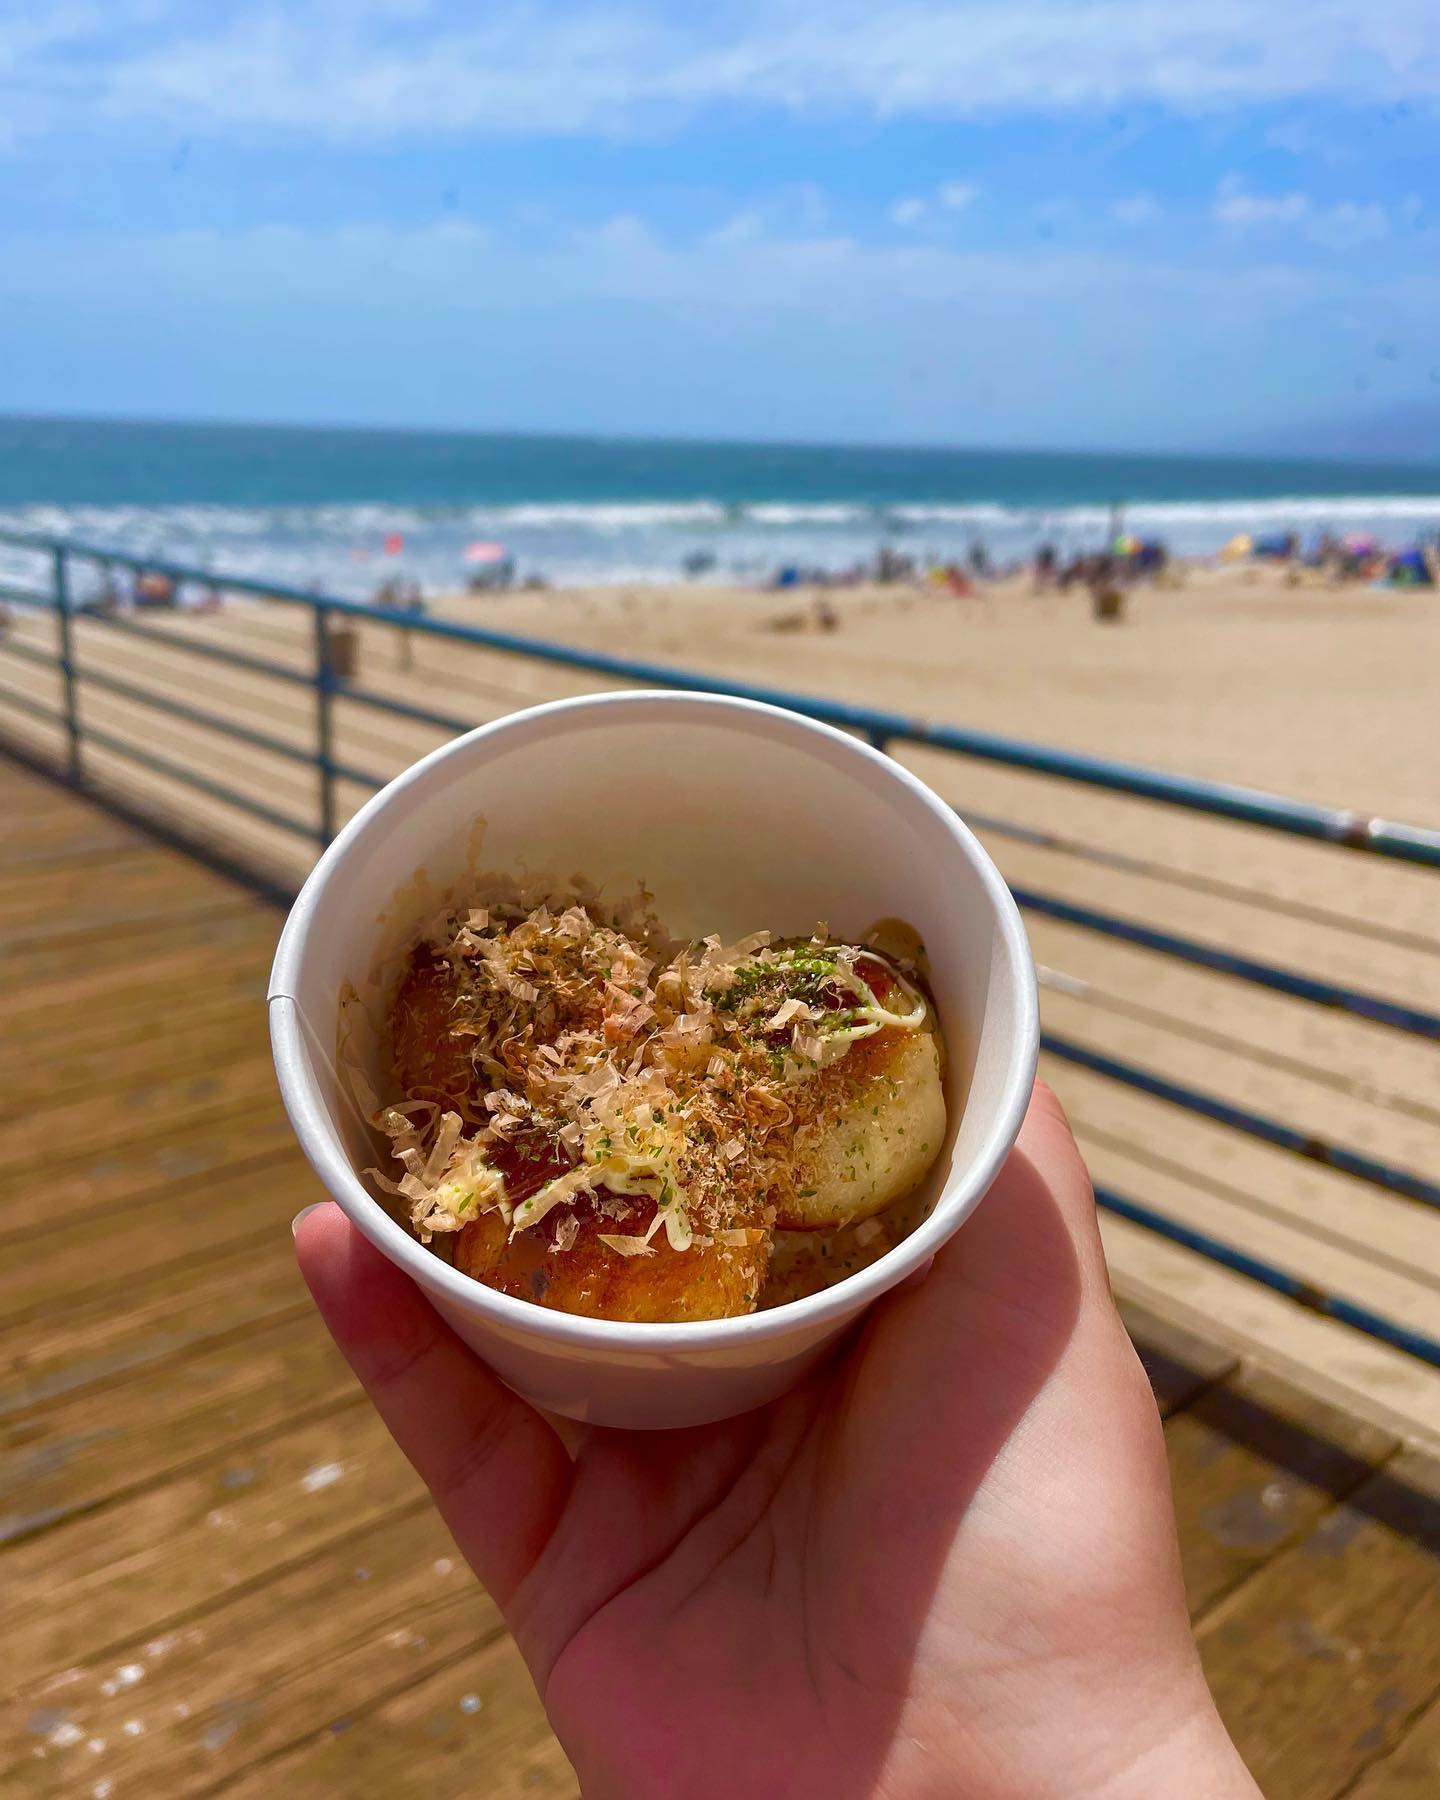 #TastyTuesday: Have you tried the takoyaki bowl from @japadogcalifornia on the Santa Monica Pier Boardwalk?! 

Yummy food with a view is the best. 🤤

📸: @__epicureaneats
.
.
.
#foodie #foodies #foodiegram #foodielife #foodiesofinstagram #foodstagram #santamonica #santamonicapier